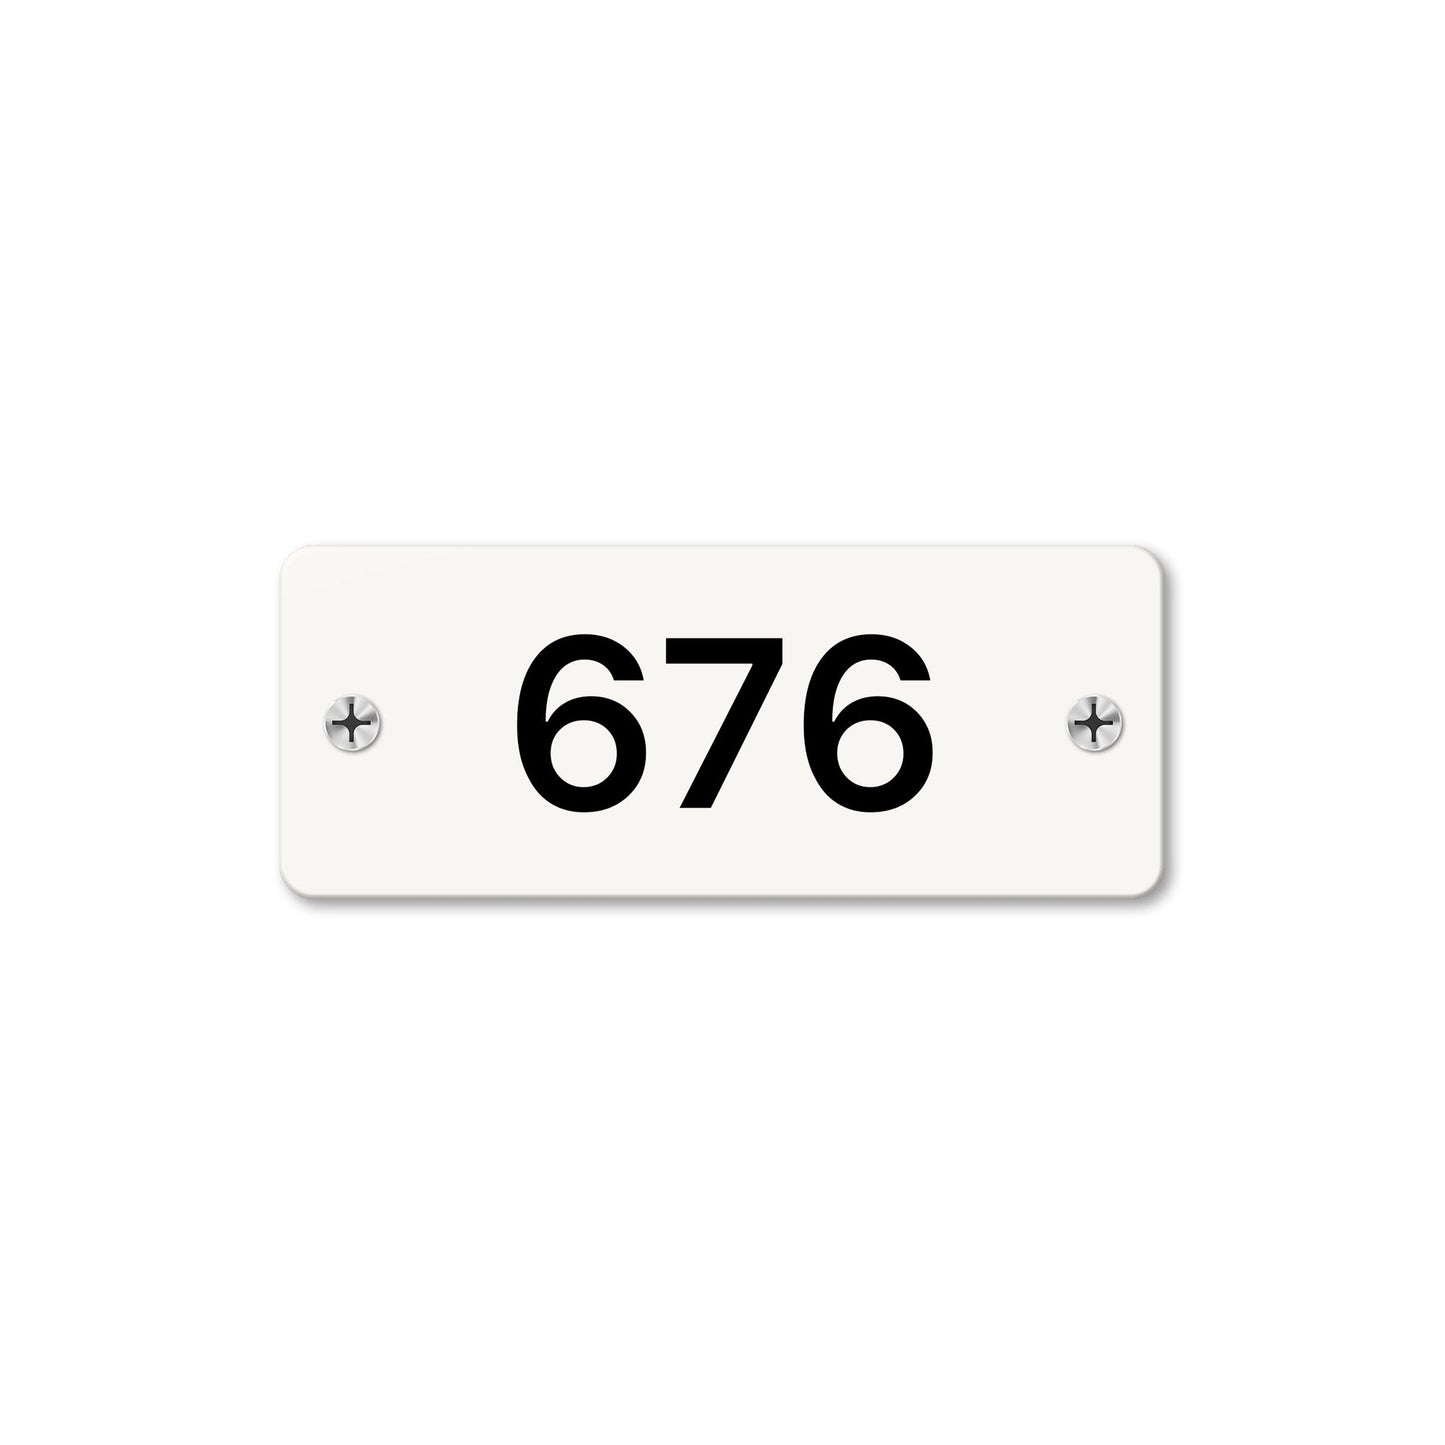 Numeral 676